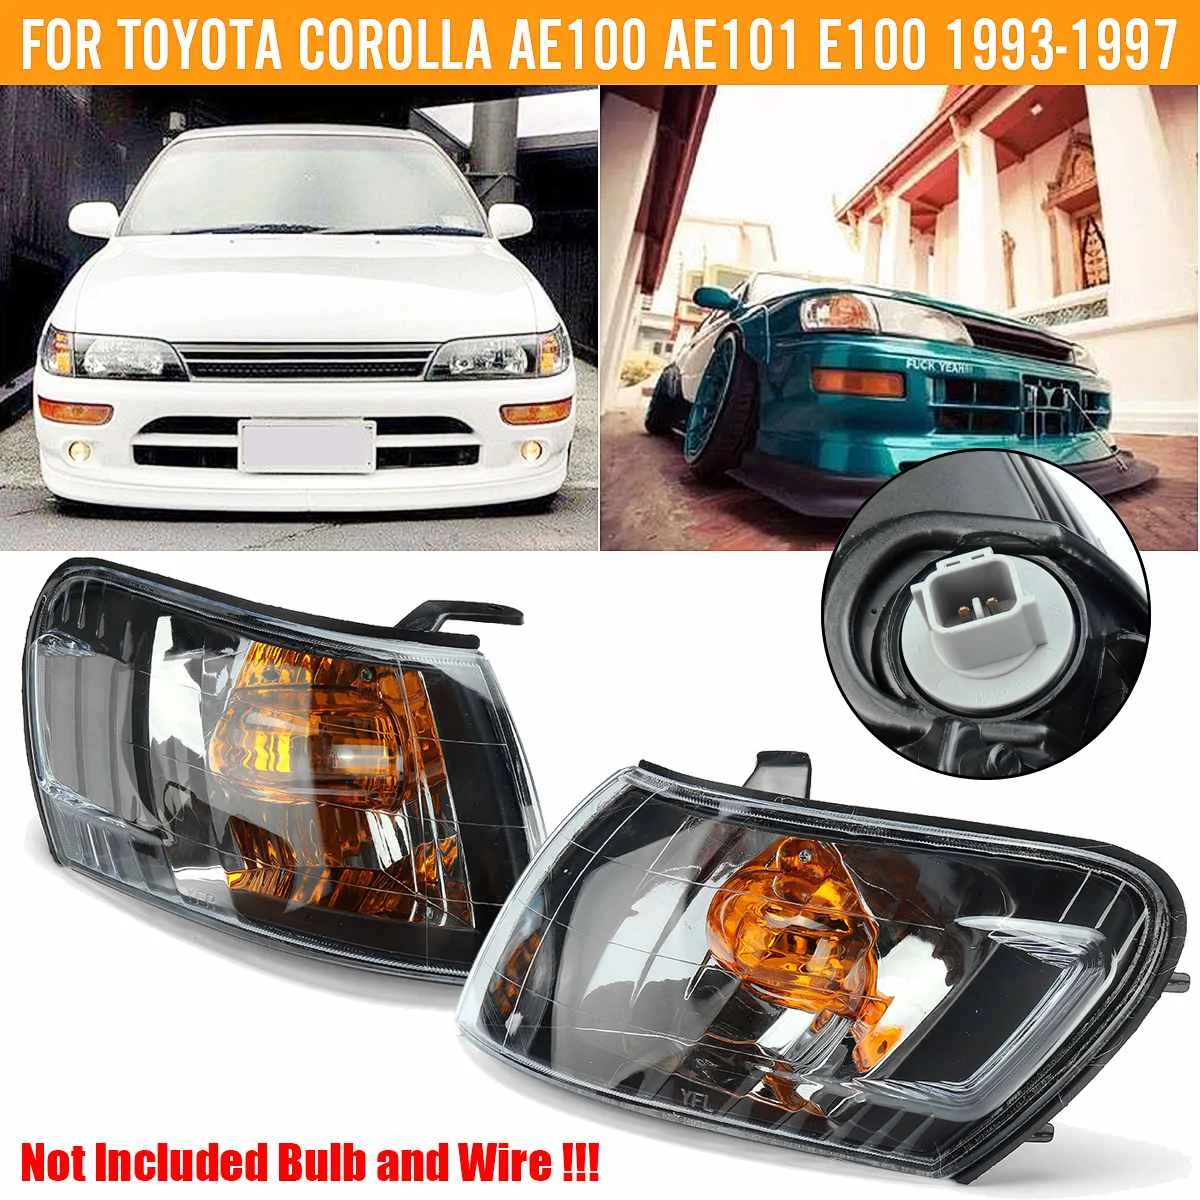 

2PCS Car Front Corner Lamp Lights Fit for Toyota Corolla AE100 E100 AE101 1993 1994 1995 1996 1997 Signal Lamp No wire harness